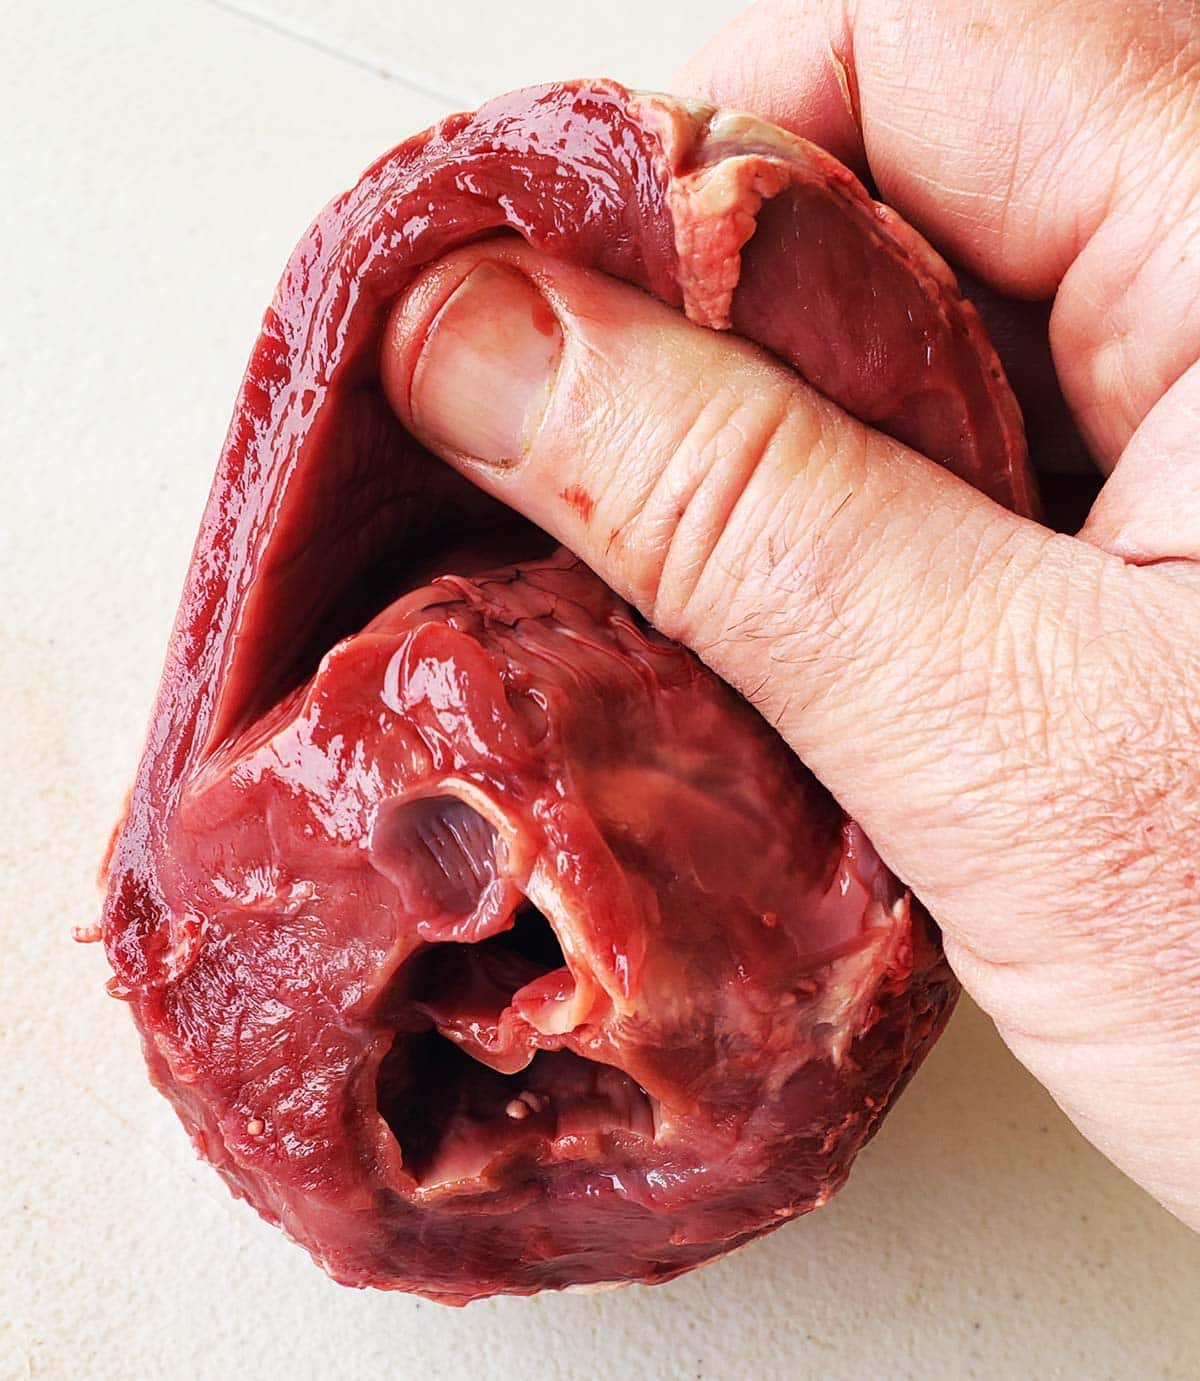 Opening the chambers of a deer heart to prepare it for cooking. 